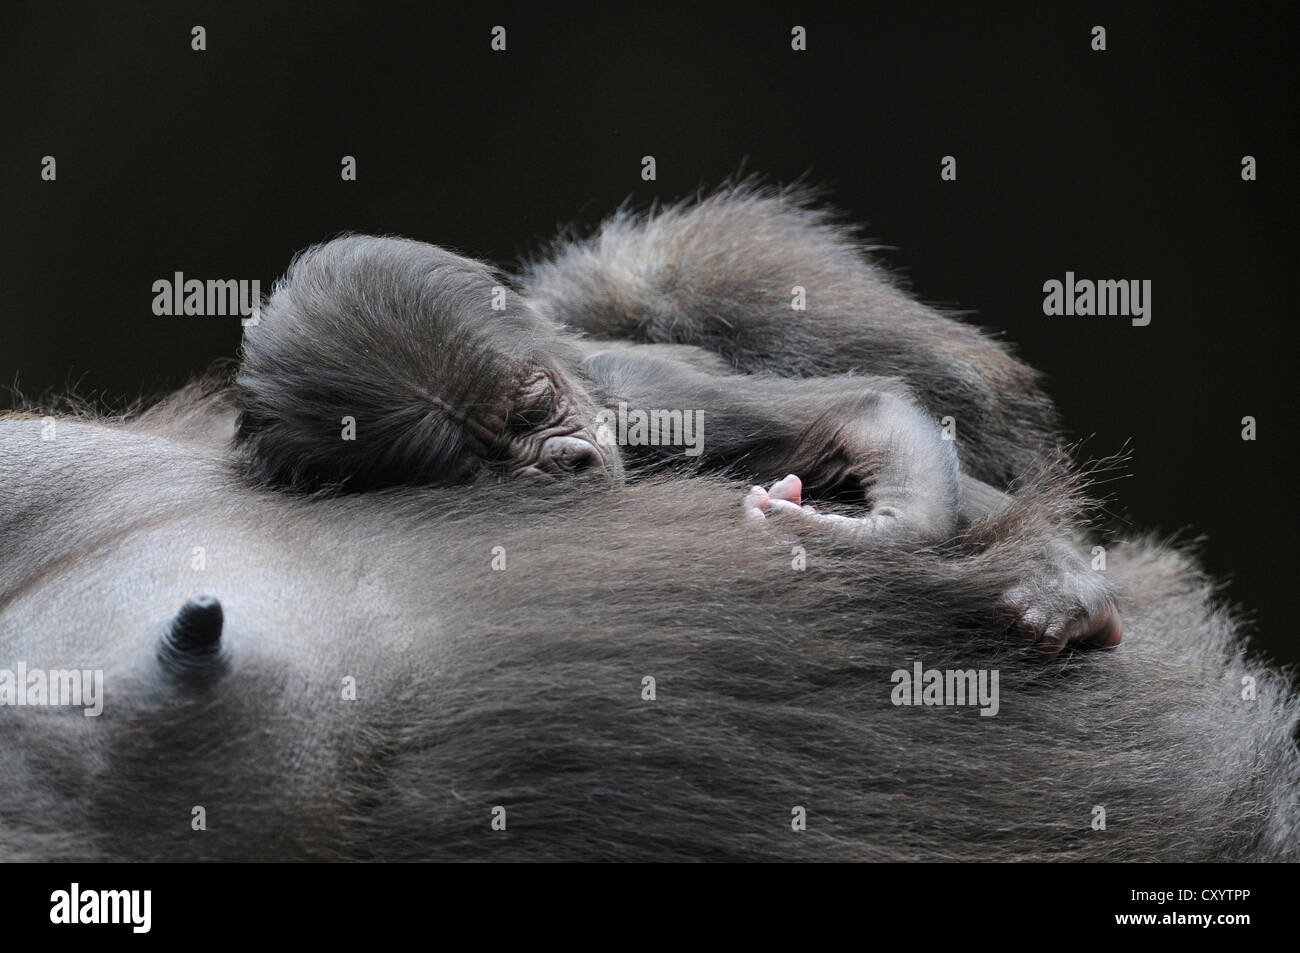 Western Lowland Gorilla (Gorilla gorilla gorilla), baby sleeping on the belly of its mother, captive, African species Stock Photo